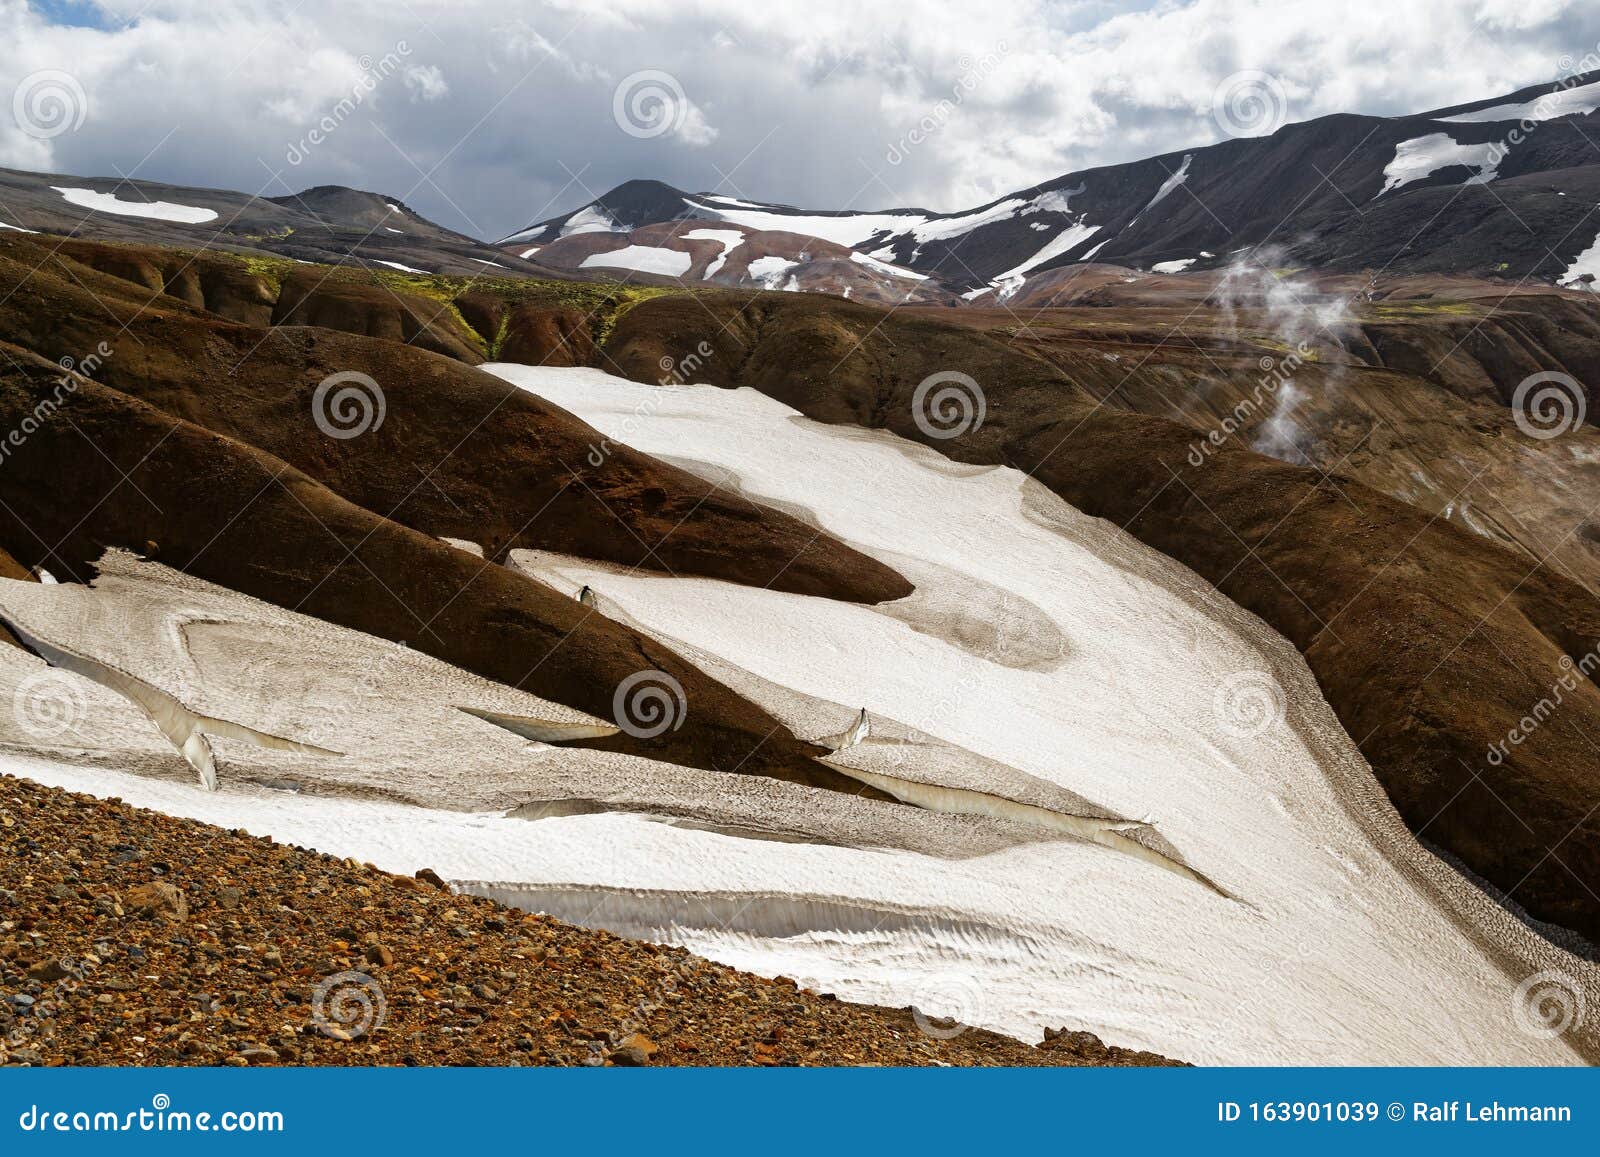 iceland - mountain landscape with snowfields